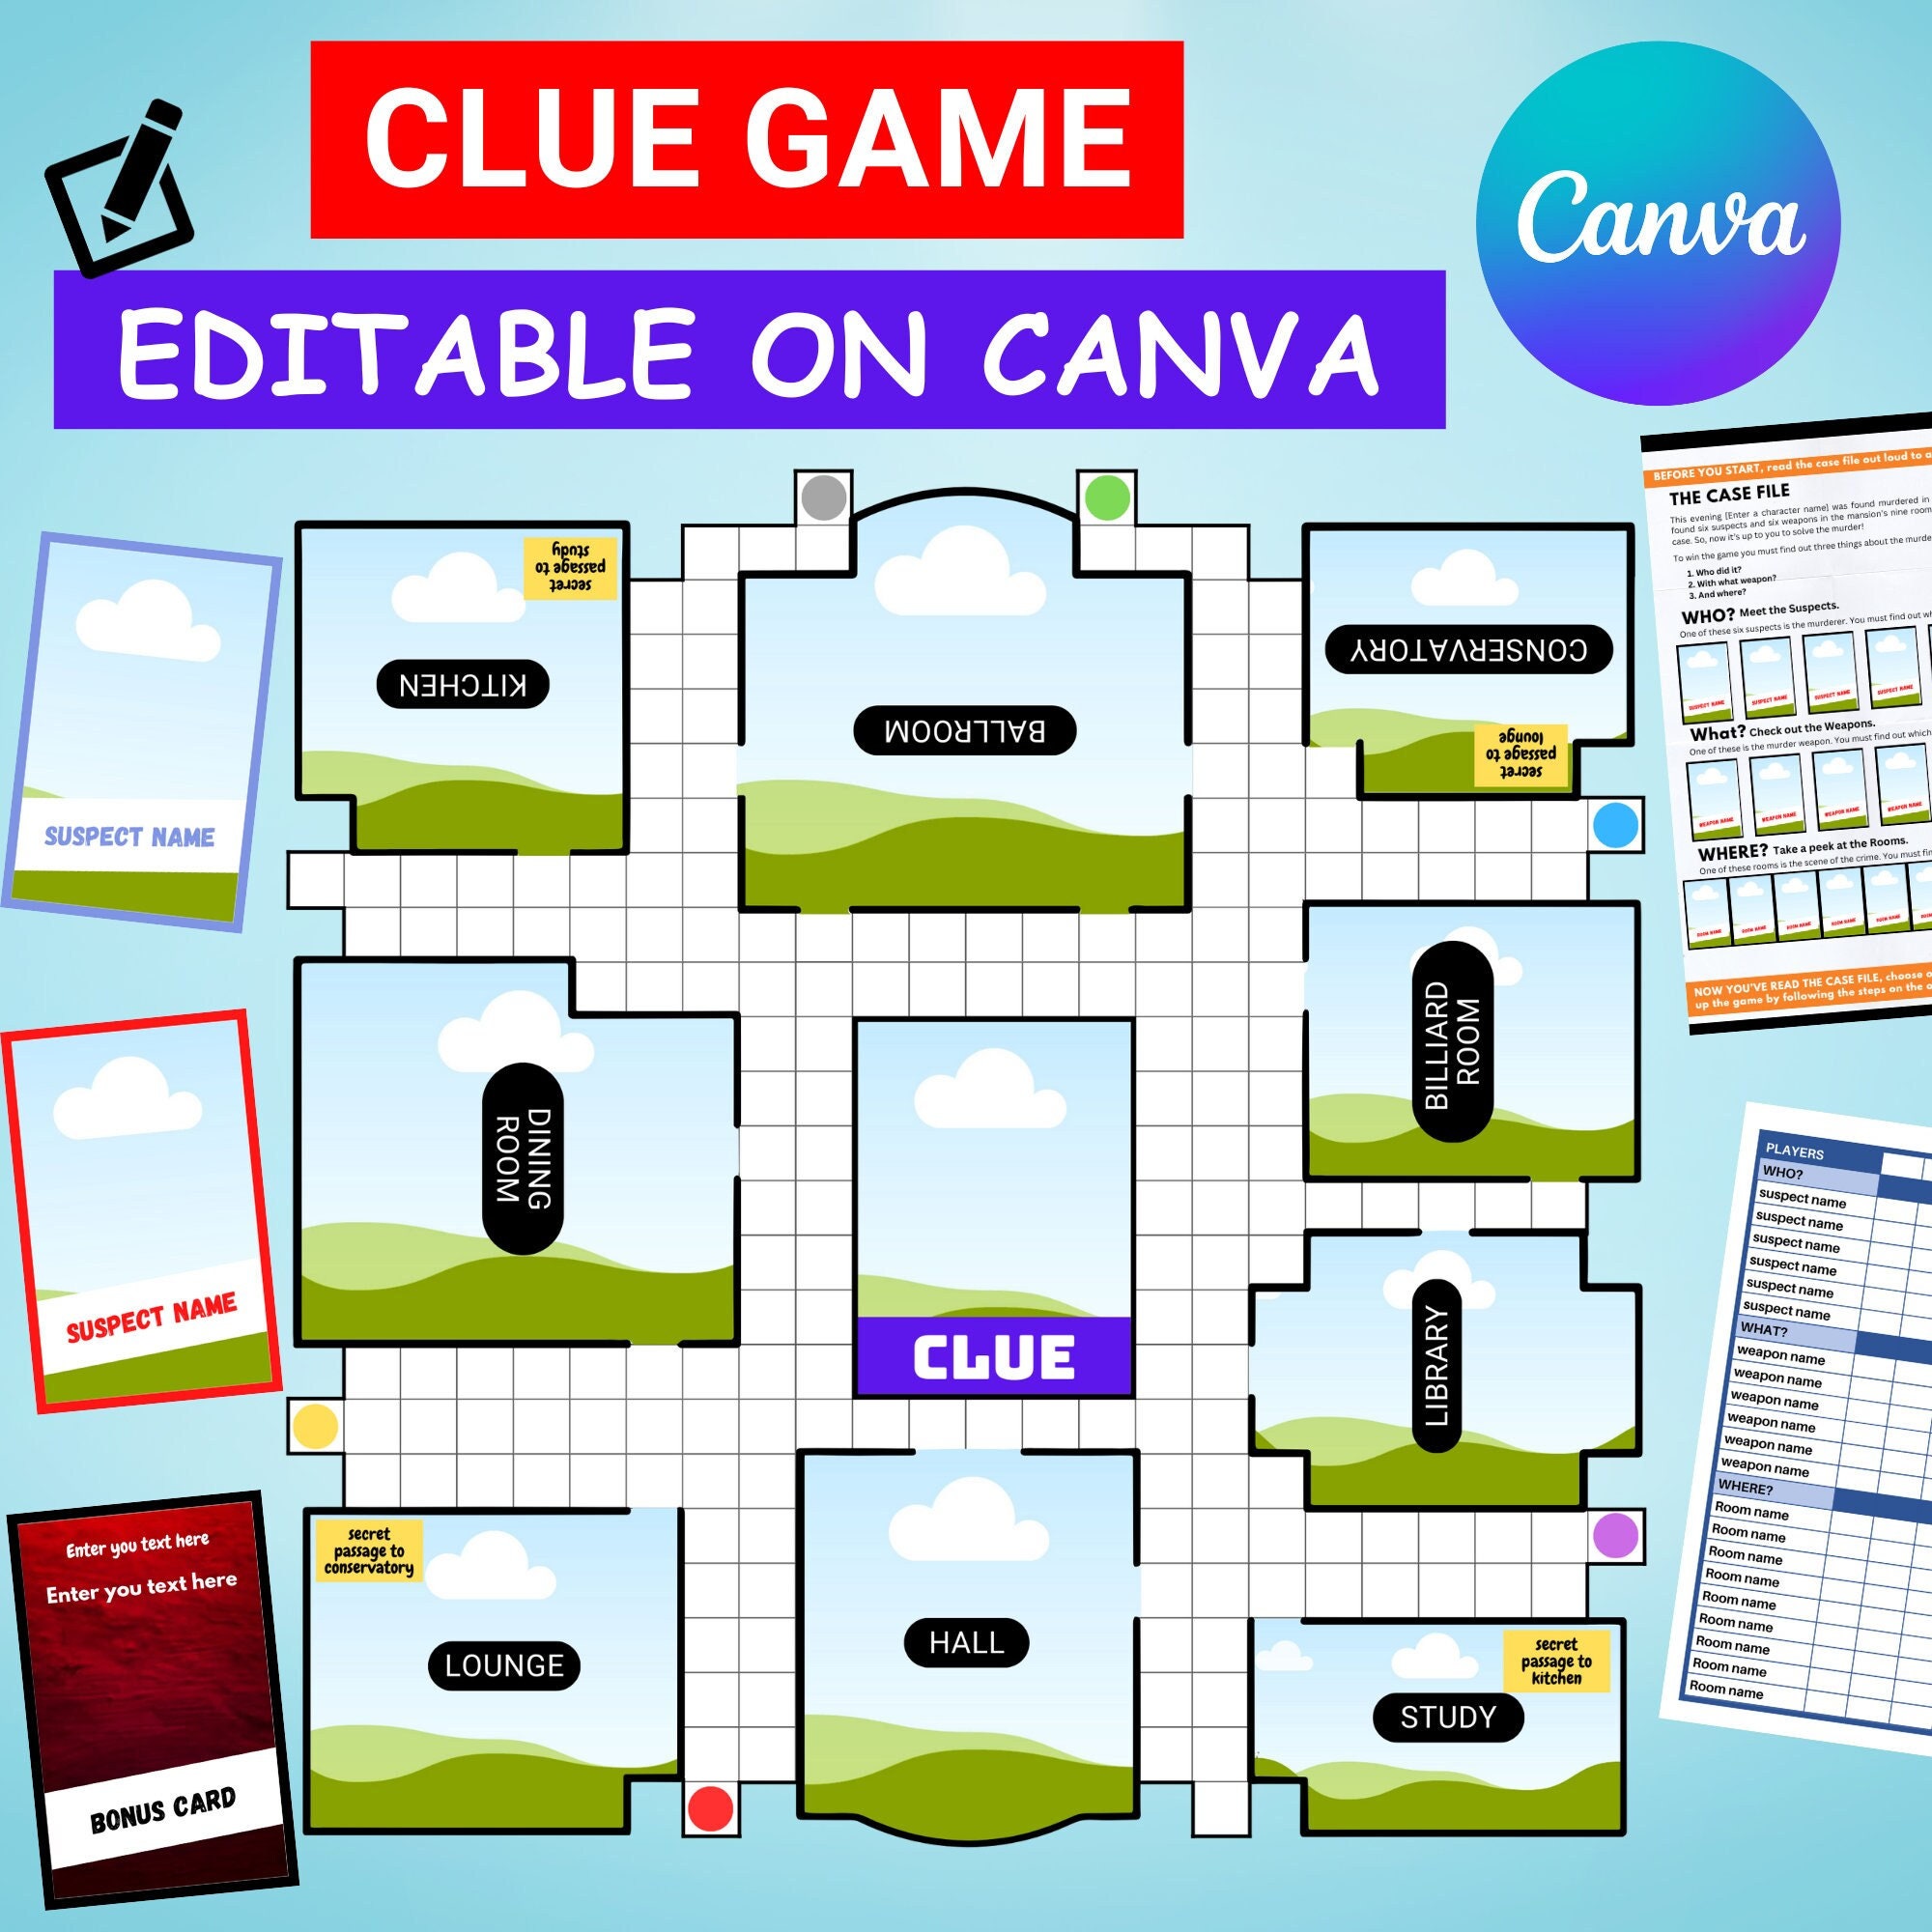 Virtual Board Game Templates Expansion Pack